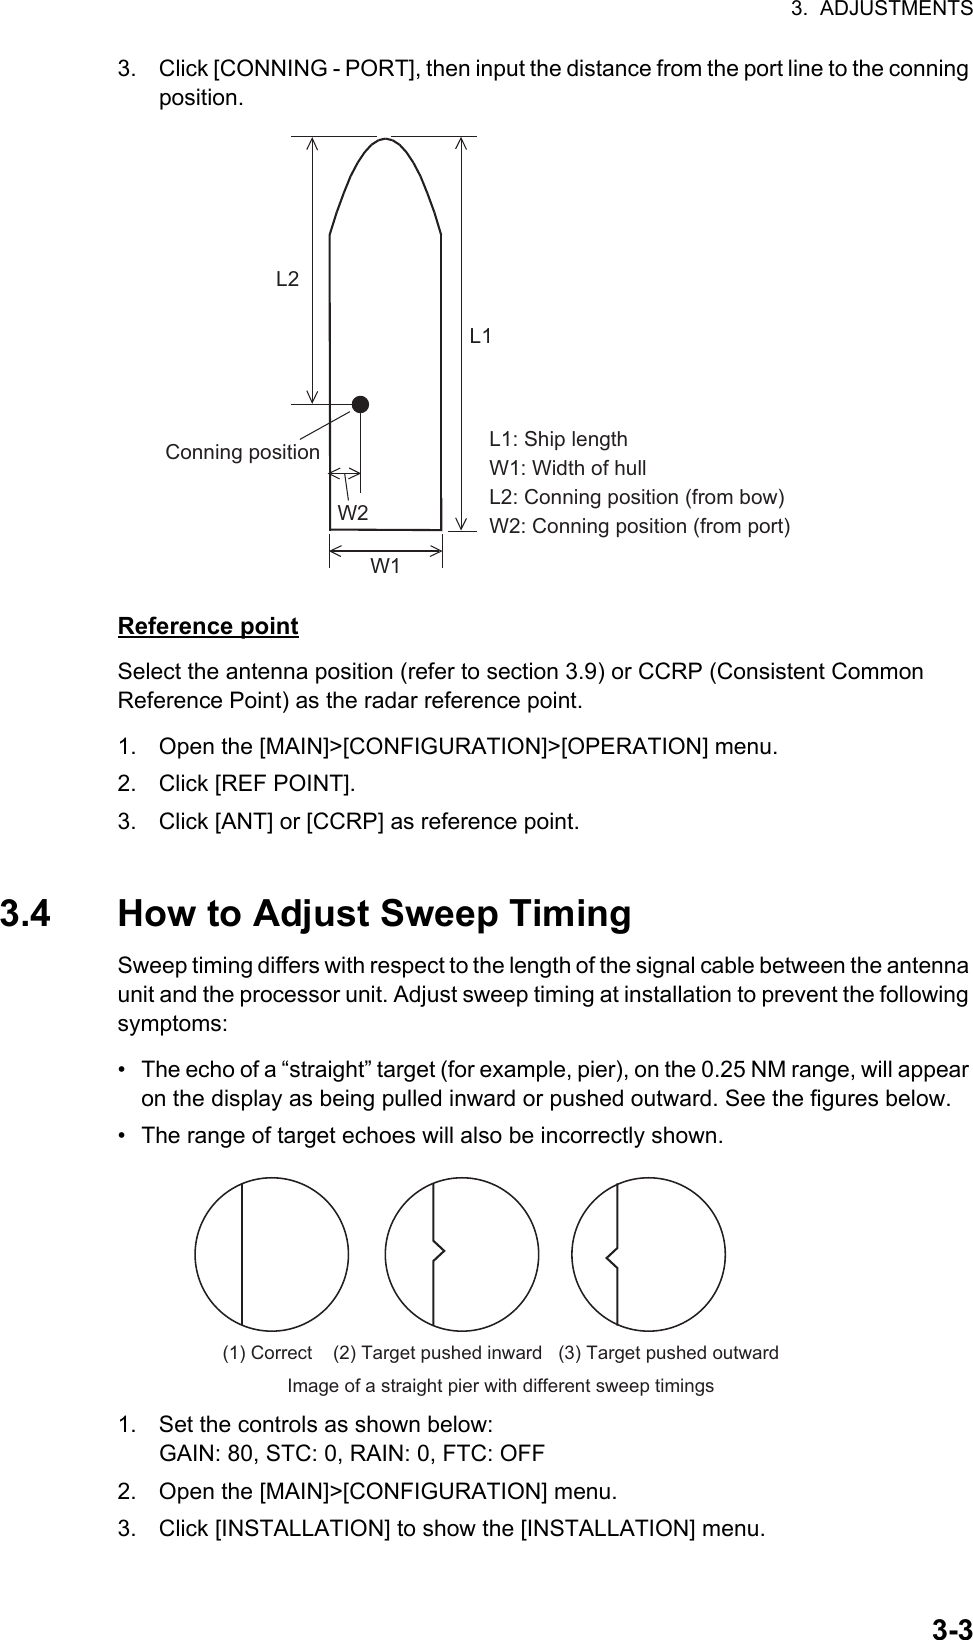 3.  ADJUSTMENTS3-33. Click [CONNING - PORT], then input the distance from the port line to the conning position.Reference pointSelect the antenna position (refer to section 3.9) or CCRP (Consistent Common     Reference Point) as the radar reference point.1. Open the [MAIN]&gt;[CONFIGURATION]&gt;[OPERATION] menu.2. Click [REF POINT].3. Click [ANT] or [CCRP] as reference point.3.4 How to Adjust Sweep TimingSweep timing differs with respect to the length of the signal cable between the antenna unit and the processor unit. Adjust sweep timing at installation to prevent the following symptoms:•  The echo of a “straight” target (for example, pier), on the 0.25 NM range, will appear on the display as being pulled inward or pushed outward. See the figures below.•  The range of target echoes will also be incorrectly shown.1. Set the controls as shown below:GAIN: 80, STC: 0, RAIN: 0, FTC: OFF2. Open the [MAIN]&gt;[CONFIGURATION] menu.3. Click [INSTALLATION] to show the [INSTALLATION] menu.L1: Ship lengthW1: Width of hullL2: Conning position (from bow)W2: Conning position (from port)W1L1L2W2Conning position(1) Correct    (2) Target pushed inward   (3) Target pushed outwardImage of a straight pier with different sweep timings